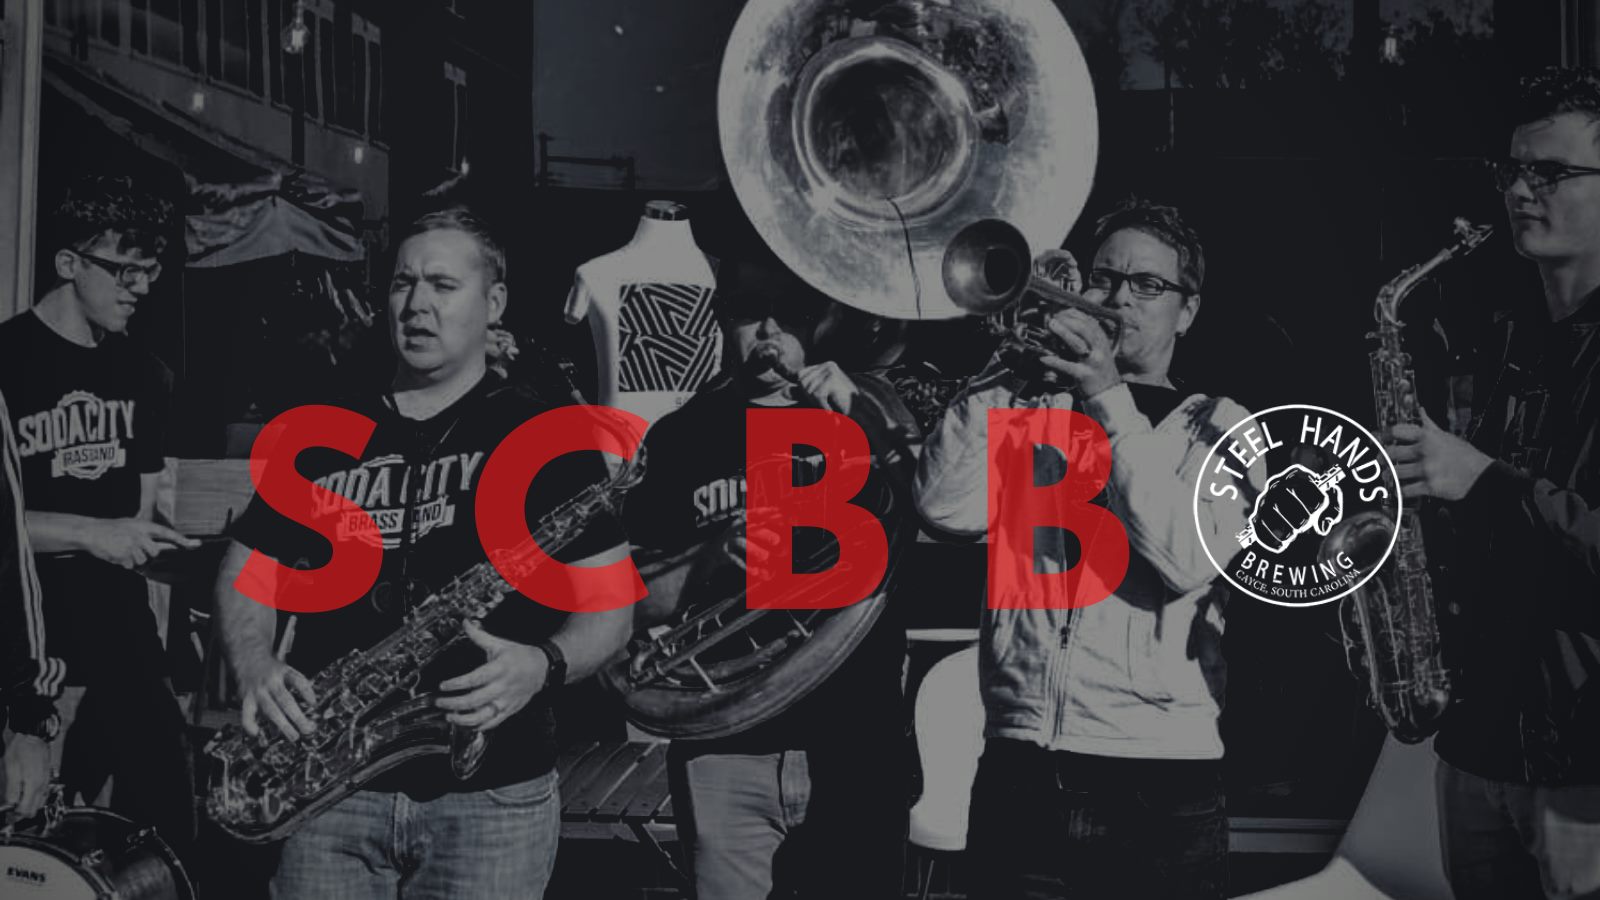 Soda City Brass Band at Steel Hands Brewing